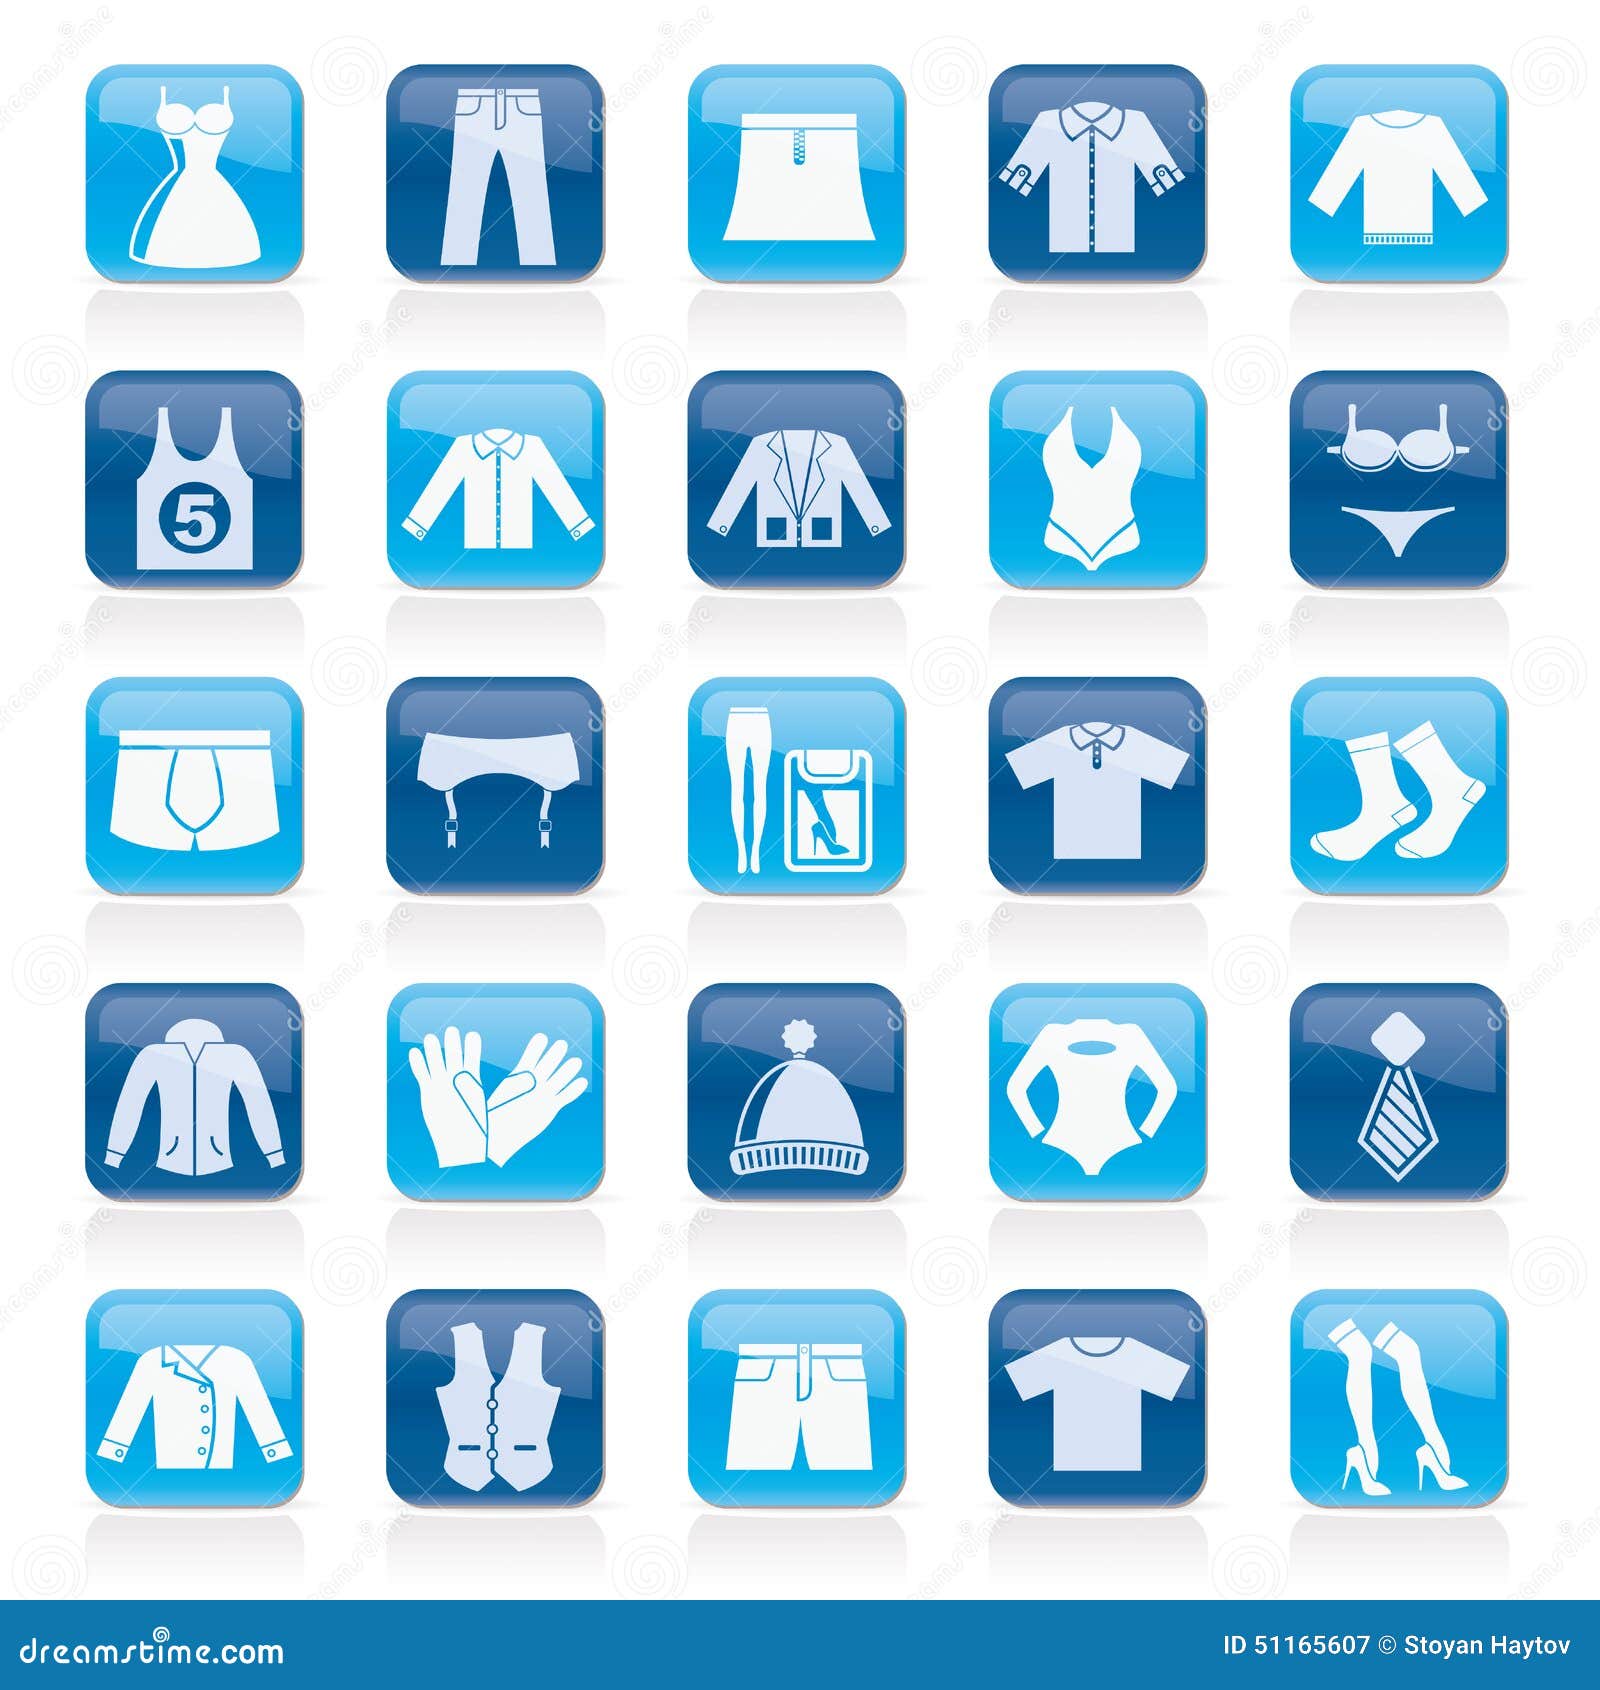 Clothing and Fashion Collection Icons Stock Vector - Illustration of ...